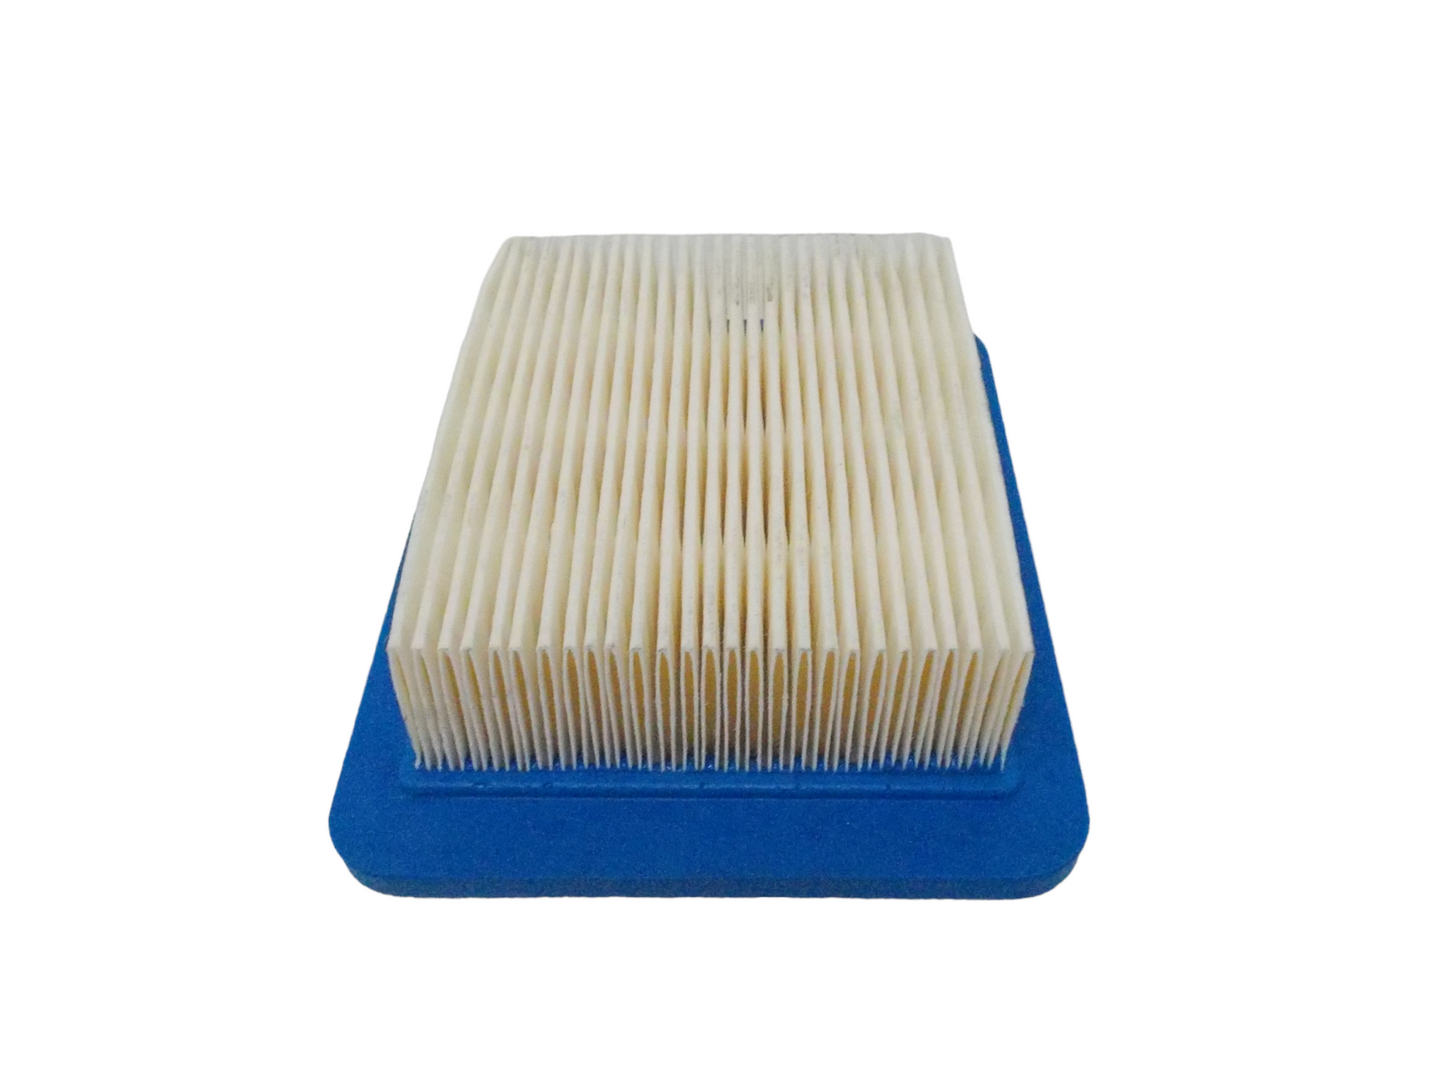 Proven Part Air Filter For 11029-2021 649351 102-747 13381